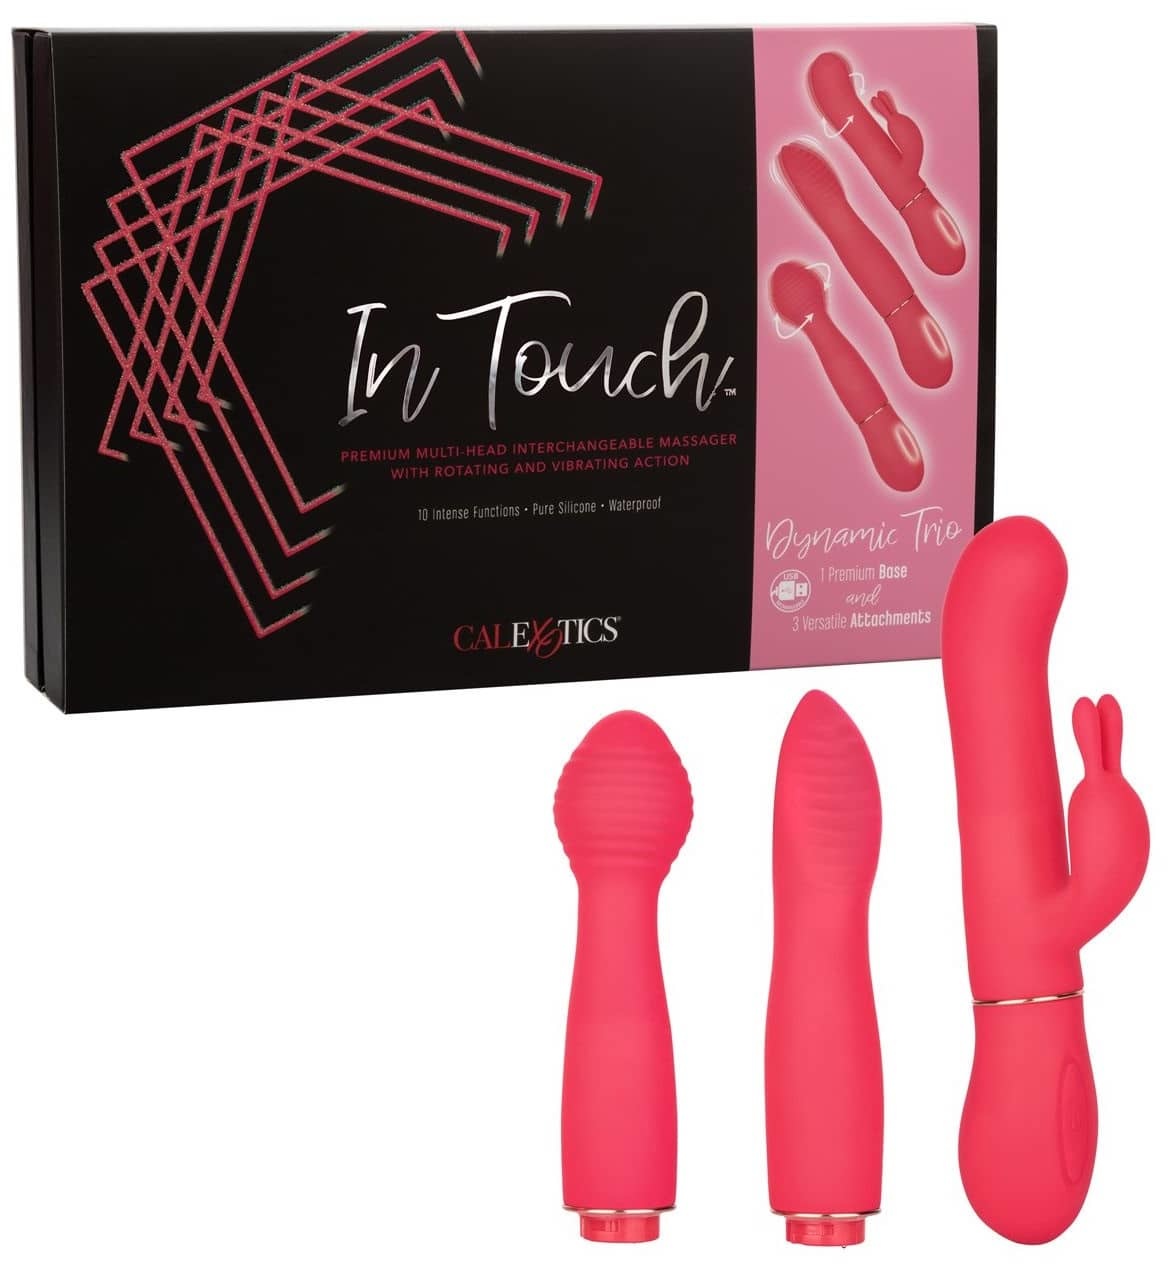 In Touch Dynamic Trio - Package & Item